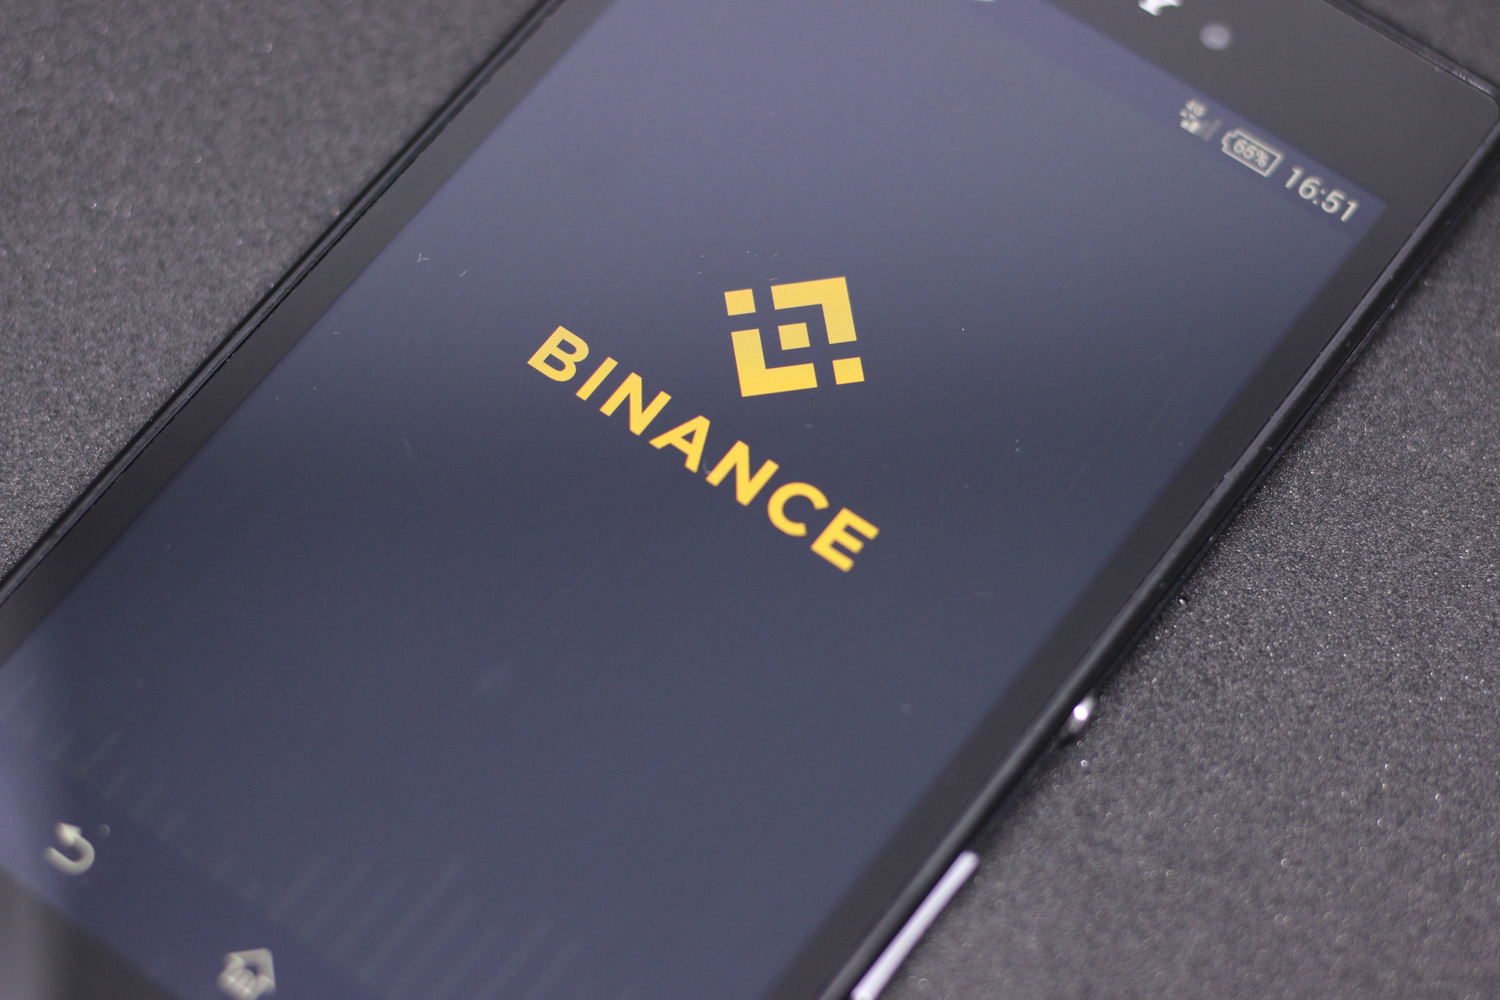 Binance Exchange Will List The USDC Stablecoin This Week